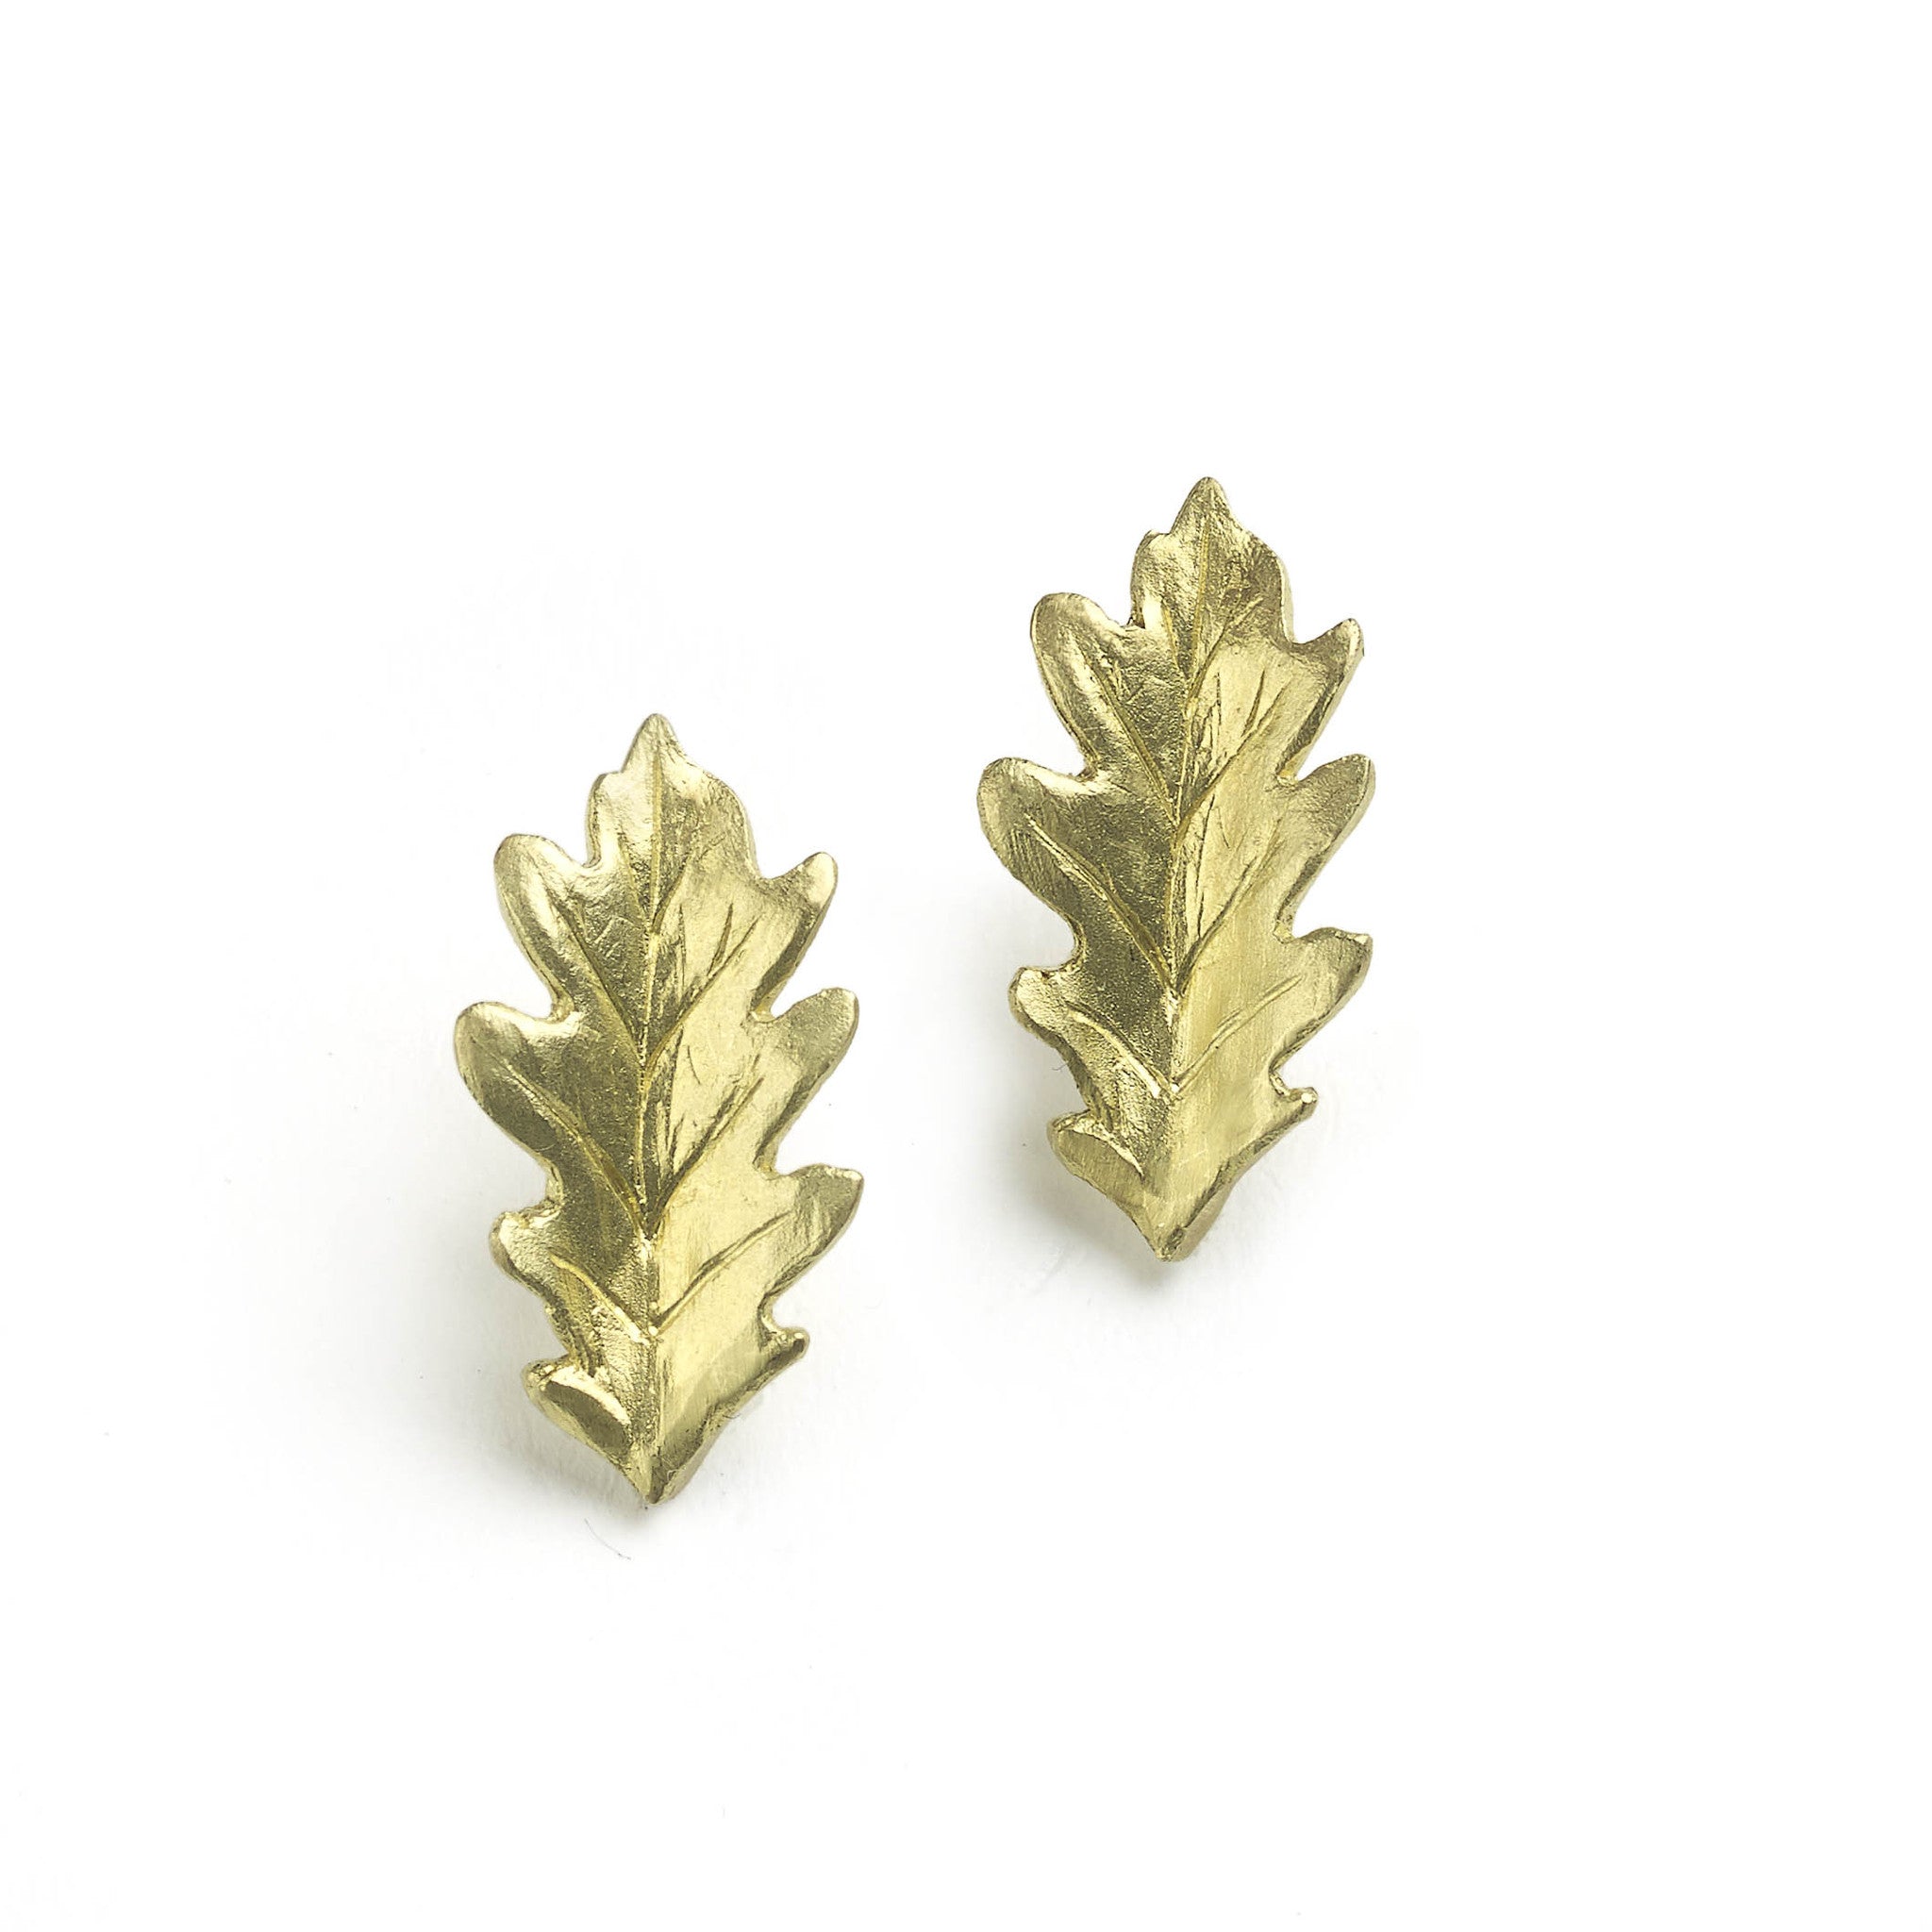 Yellow gold oak leaf earrings pictured on a white background